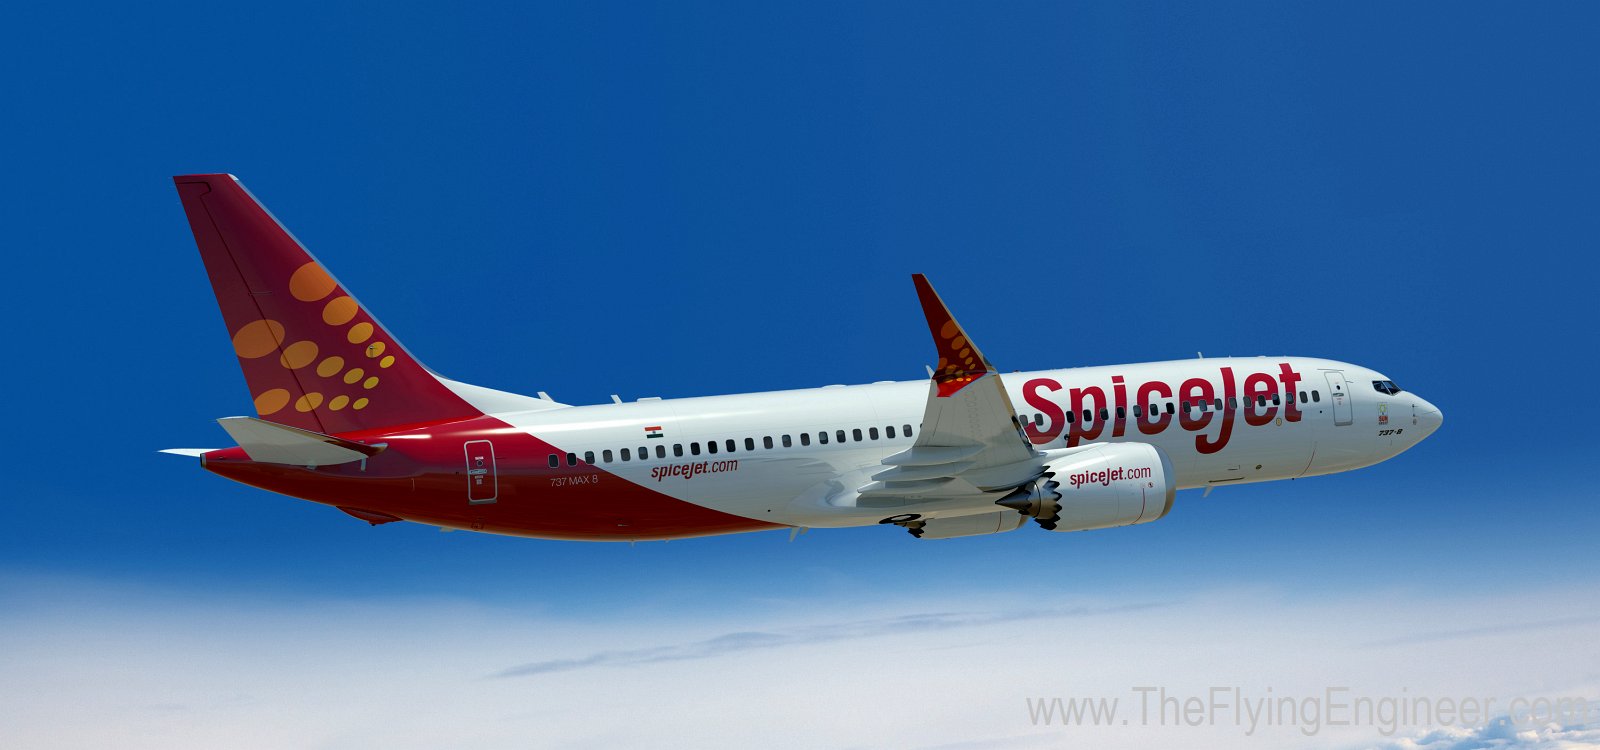 Could SpiceJet have been profitable in FY2013-14? | The Flying.